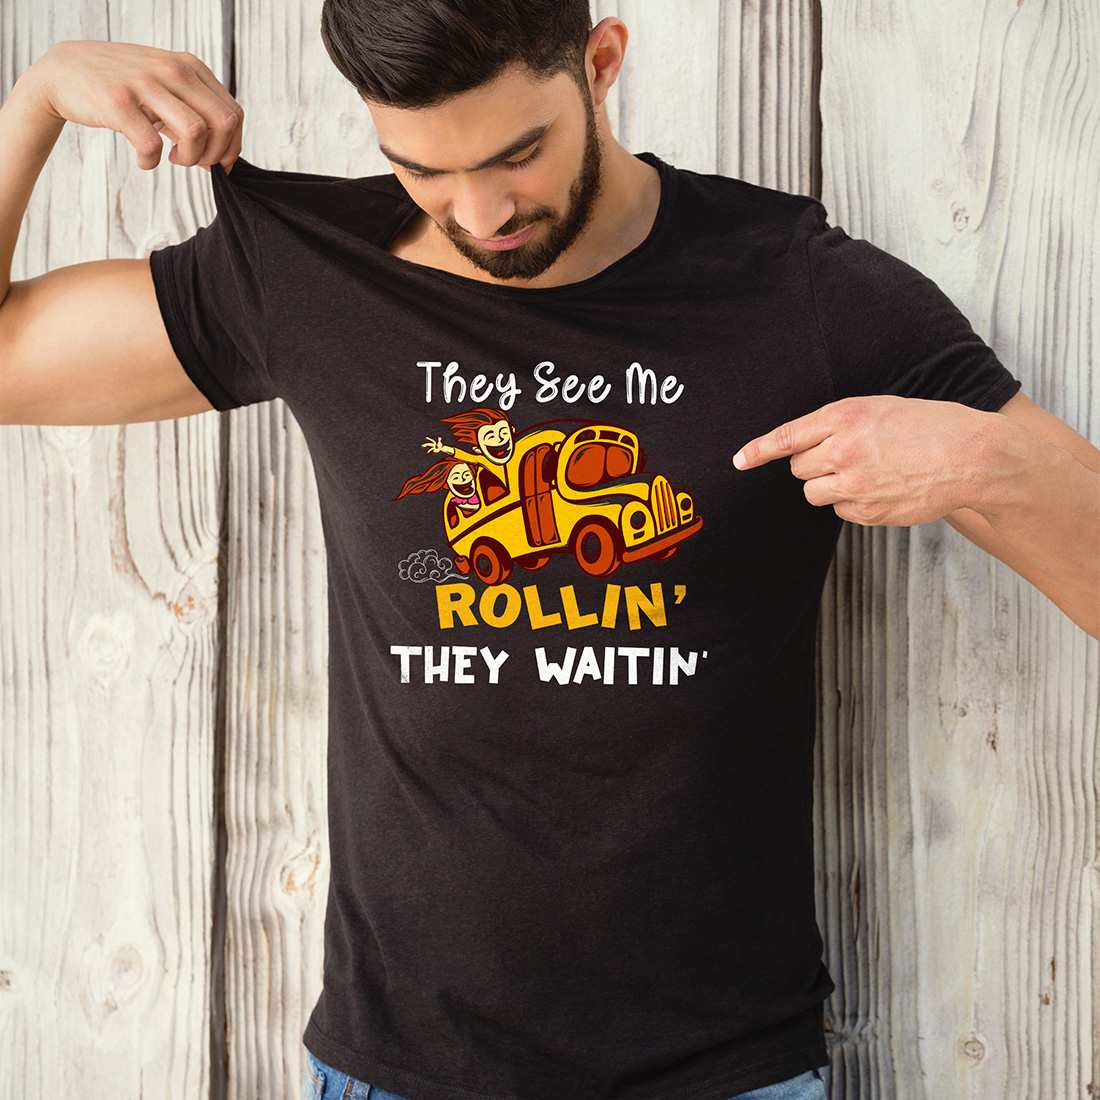 They See Me Rolling They Waitin Back to school t-shirt Design cover image.